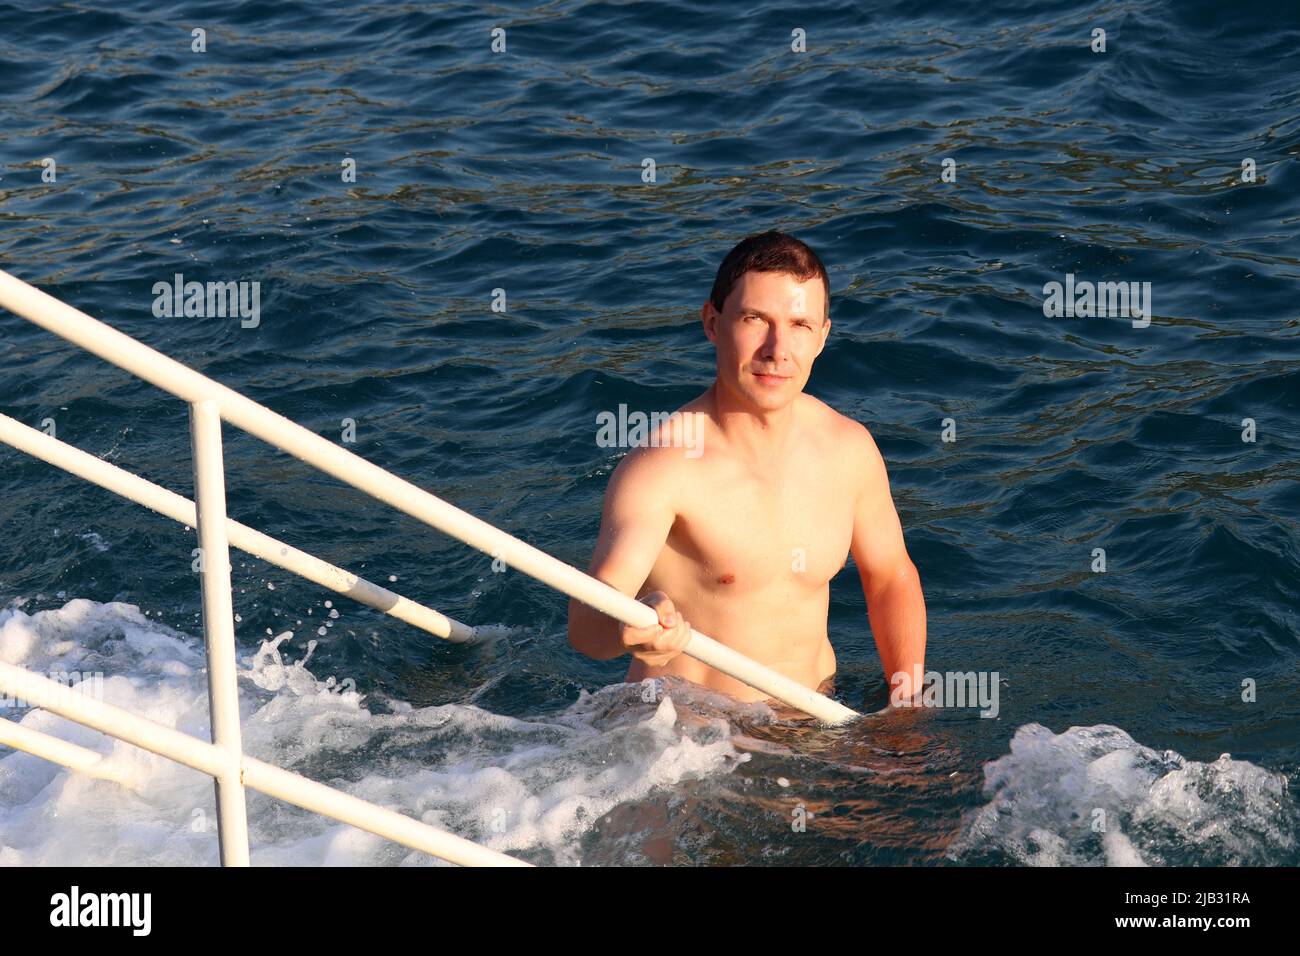 Beach vacation, swimming in the sea. Portrait of handsome muscular man going up on a ladder from blue waves Stock Photo